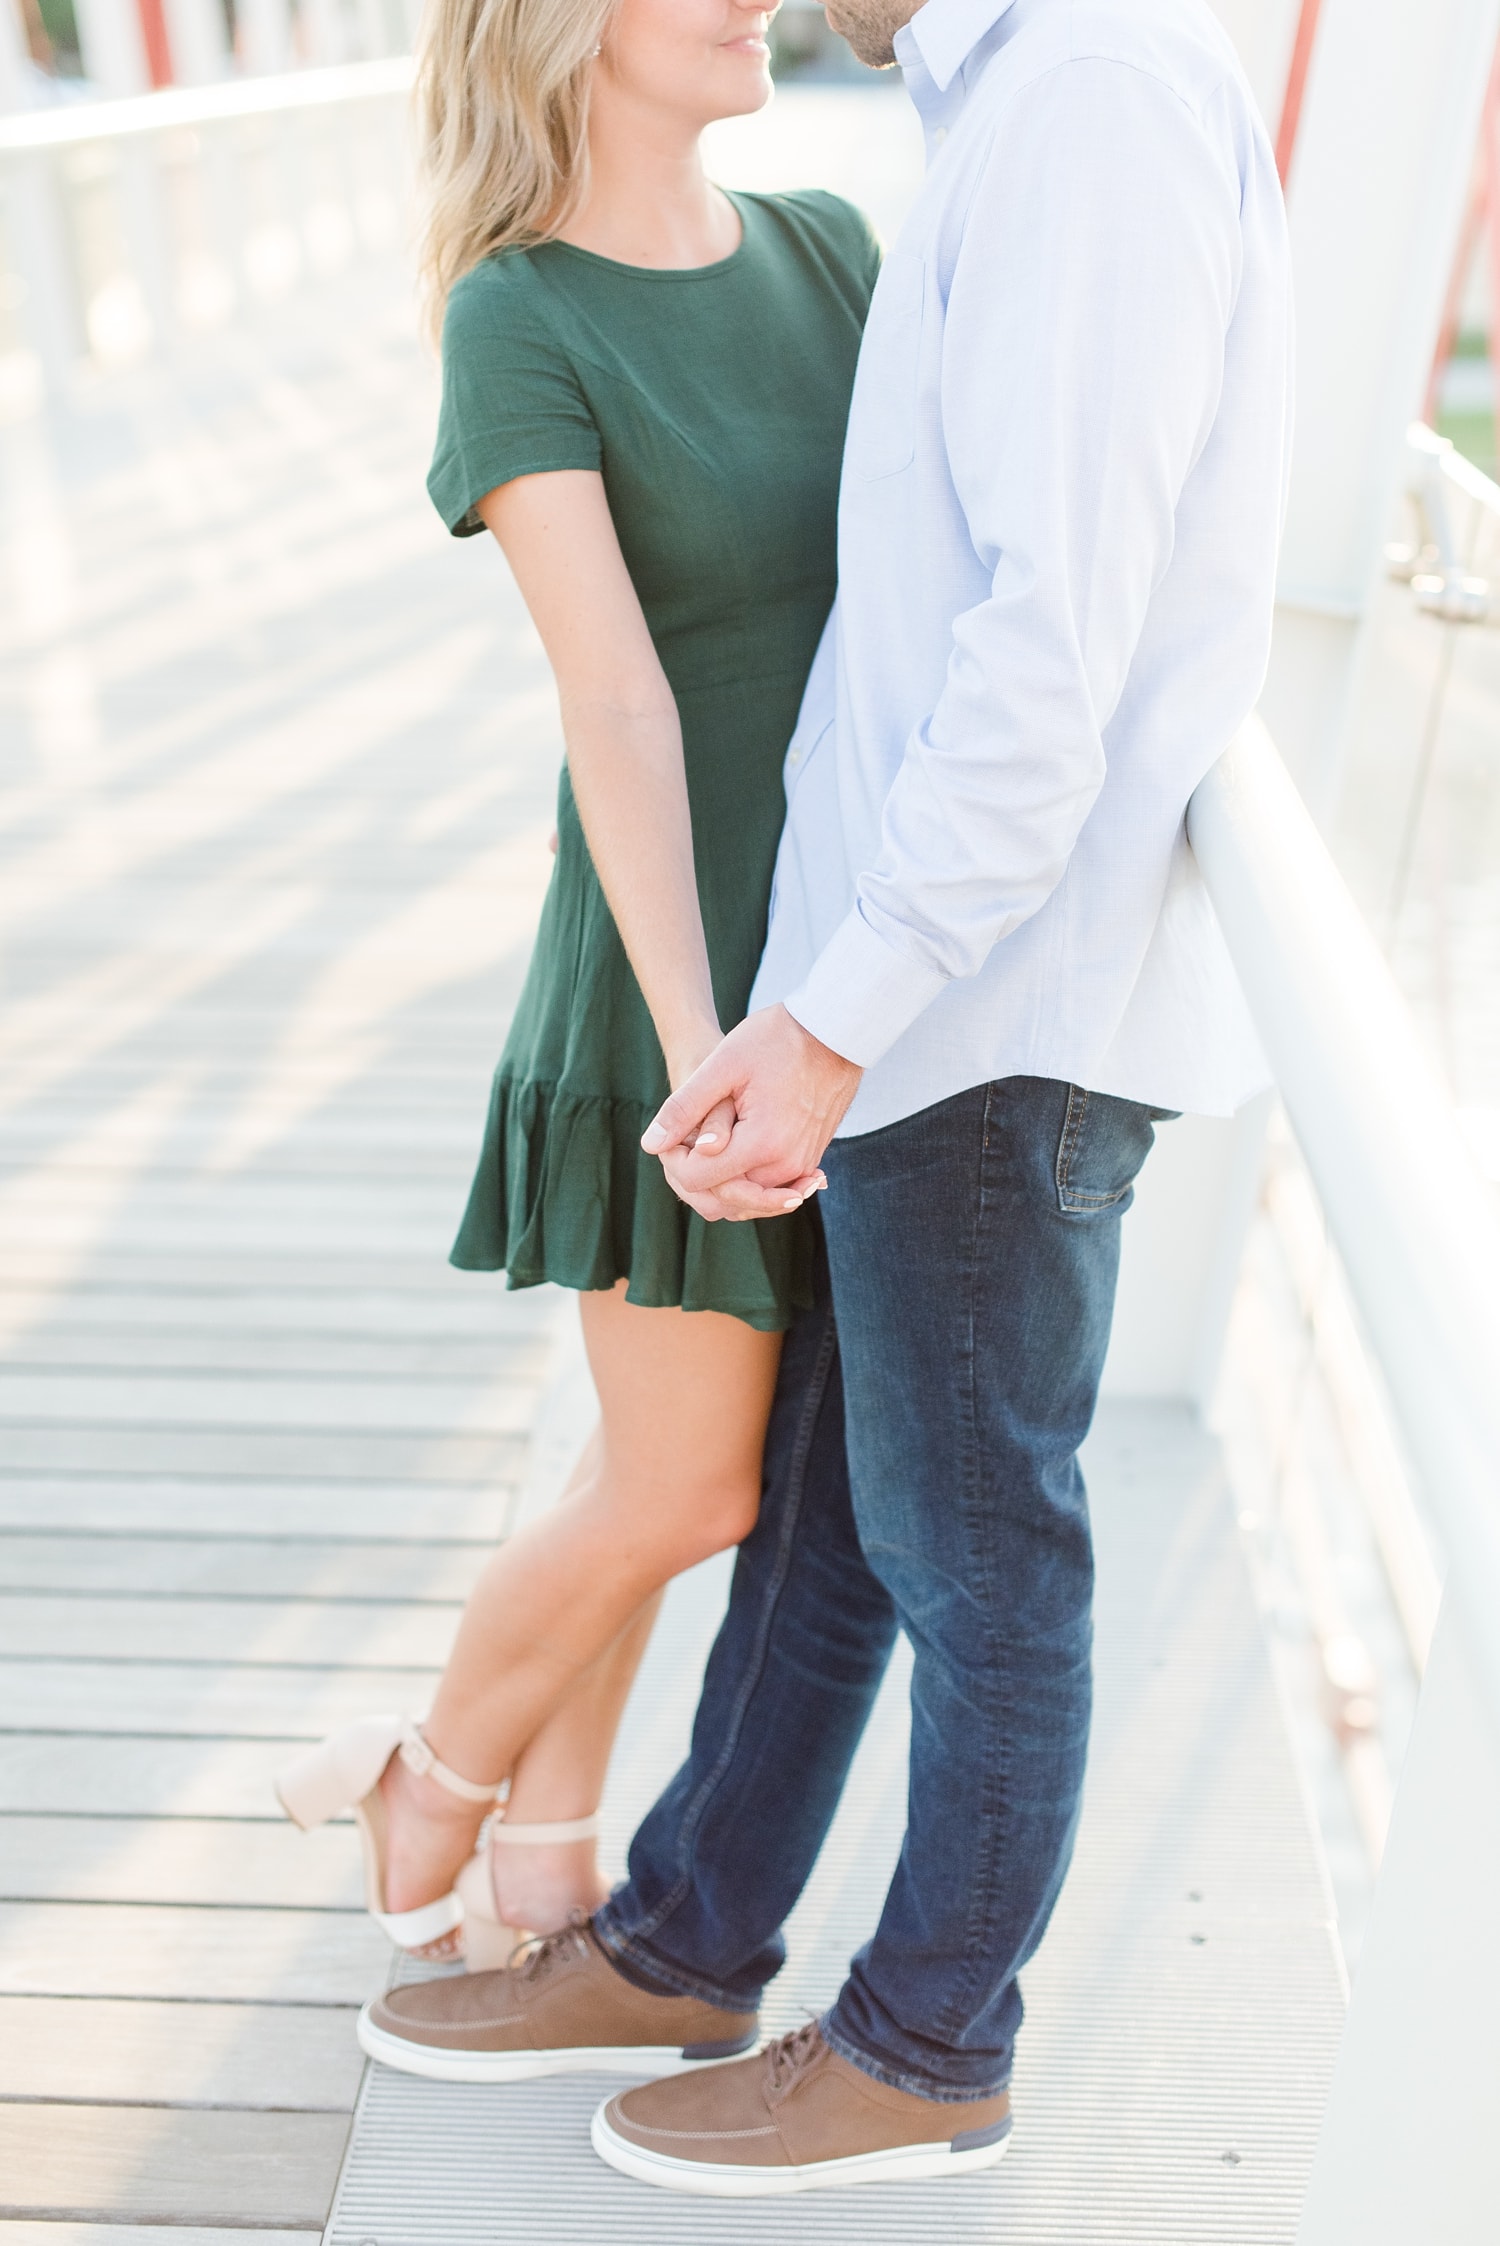 Gray's Lake Engagement Session